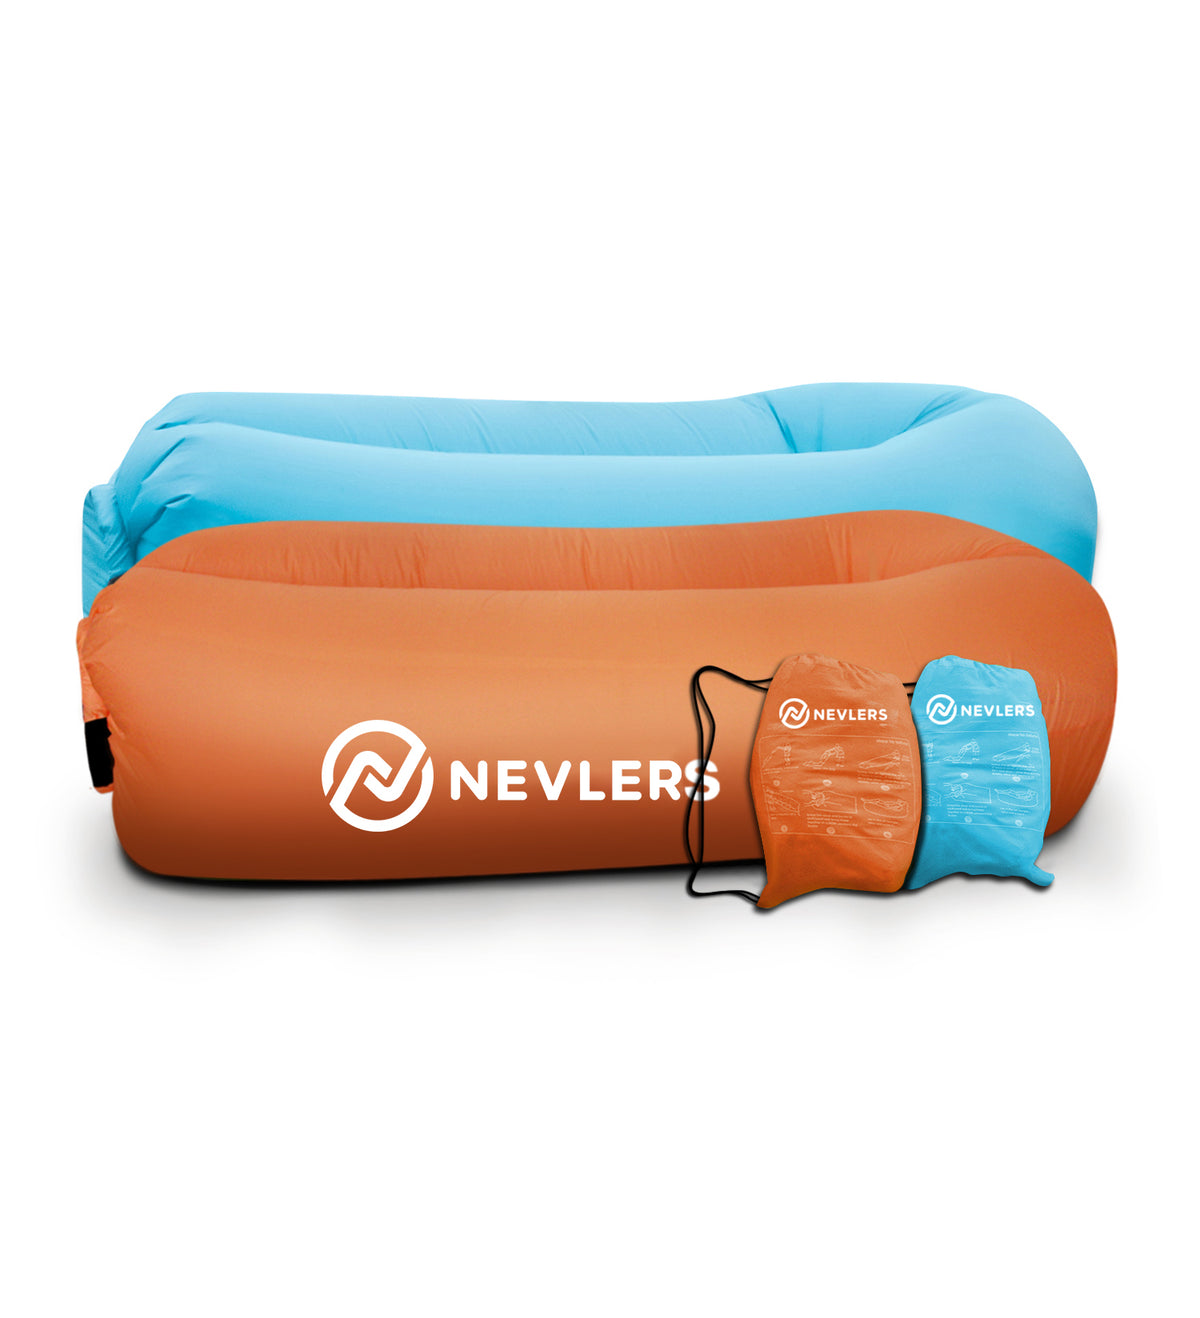 Inflatable Loungers - Blue/Orange - 2 Pack